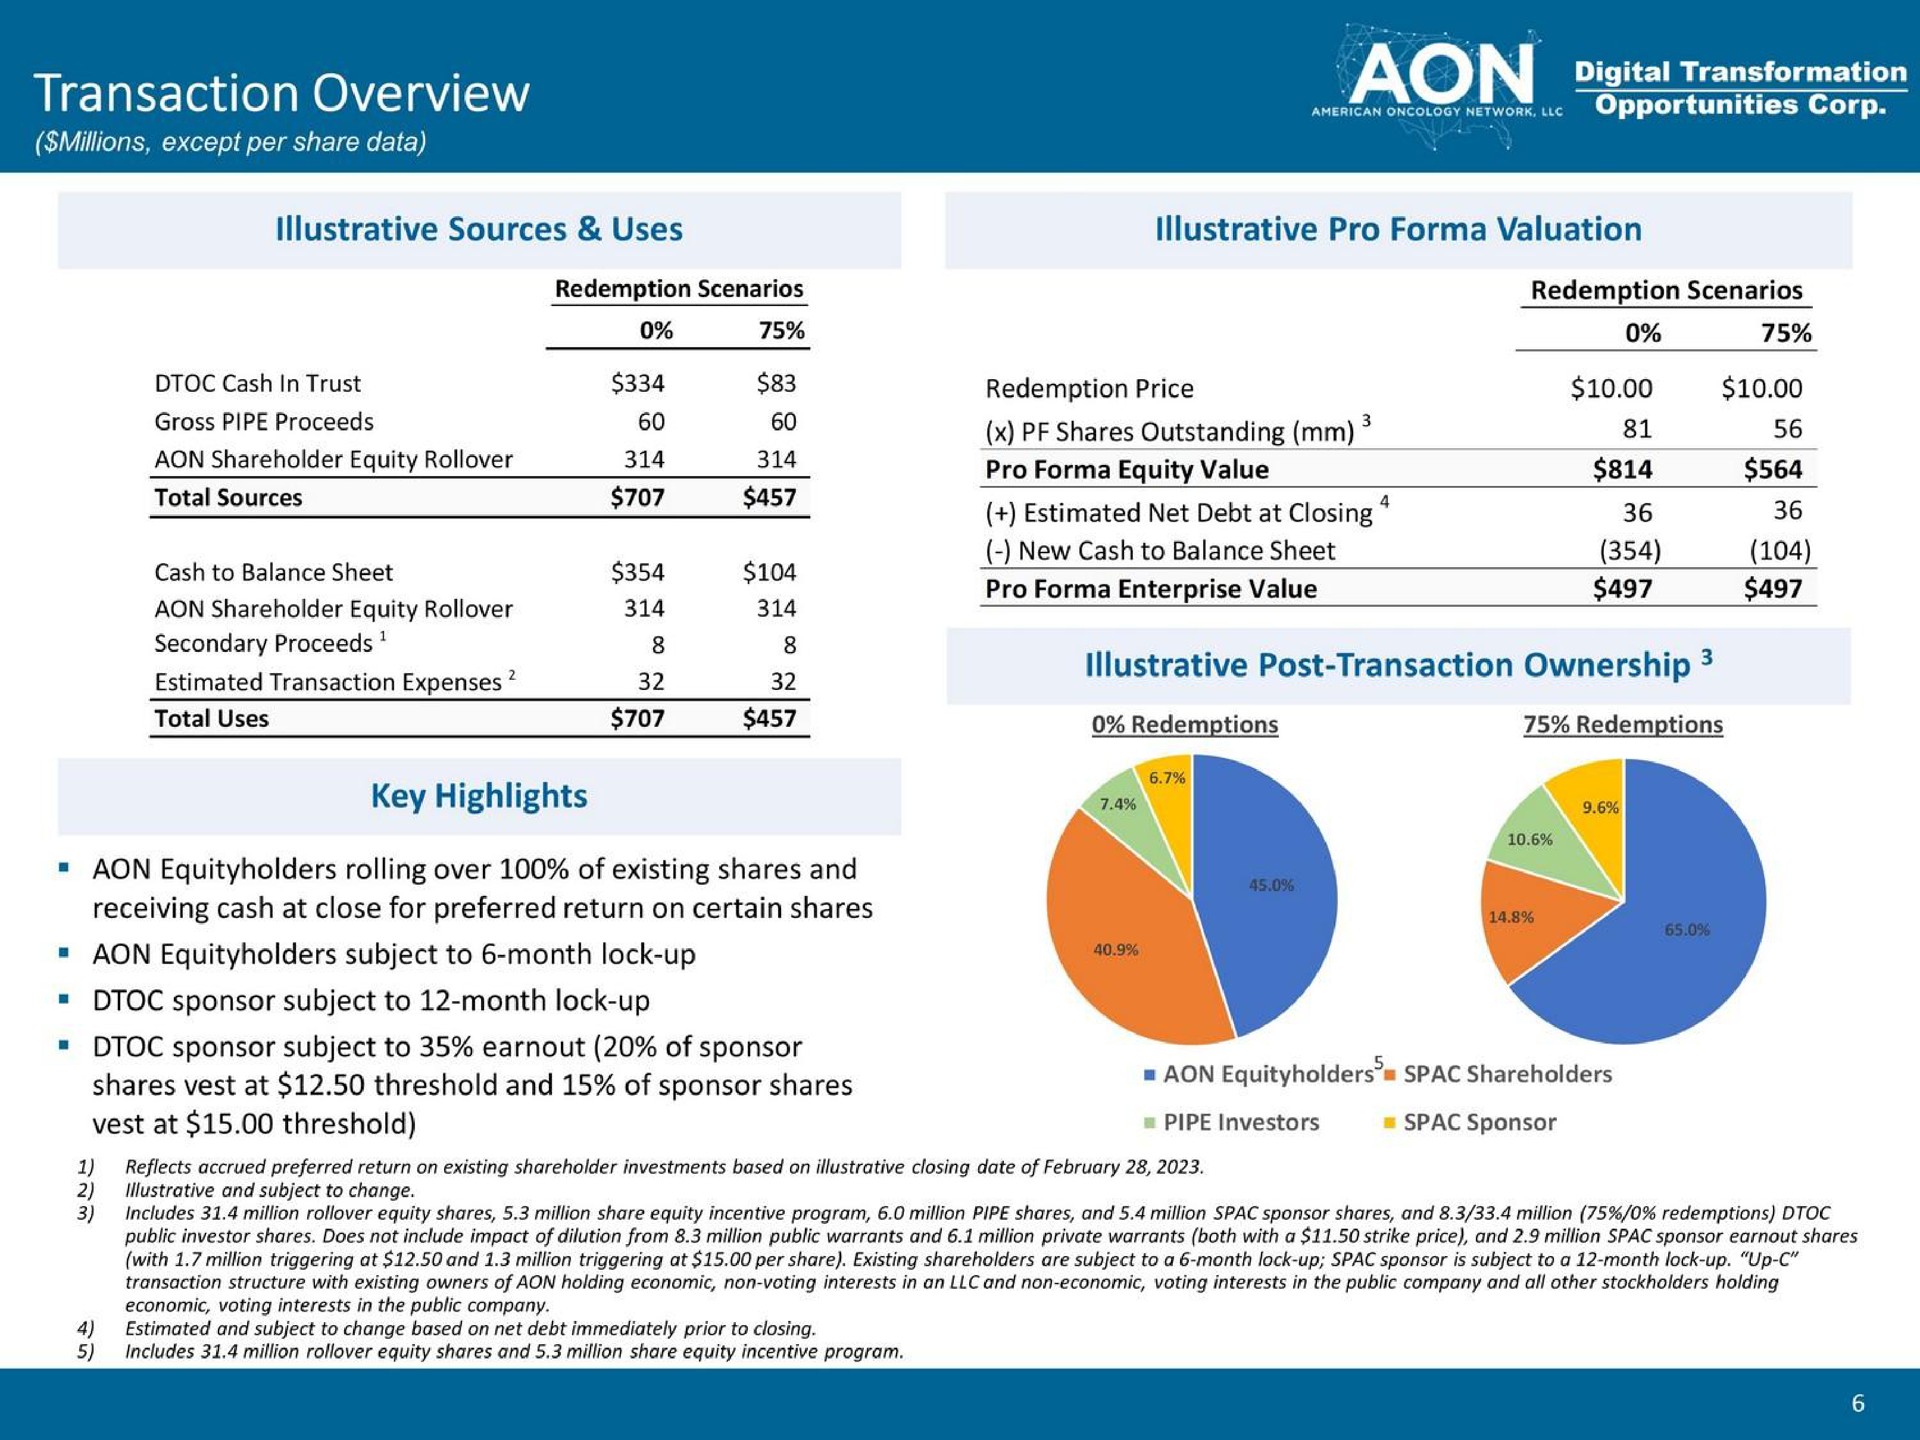 transaction overview pee shares outstanding shares vest at threshold and of sponsor shares shareholders | American Oncology Network